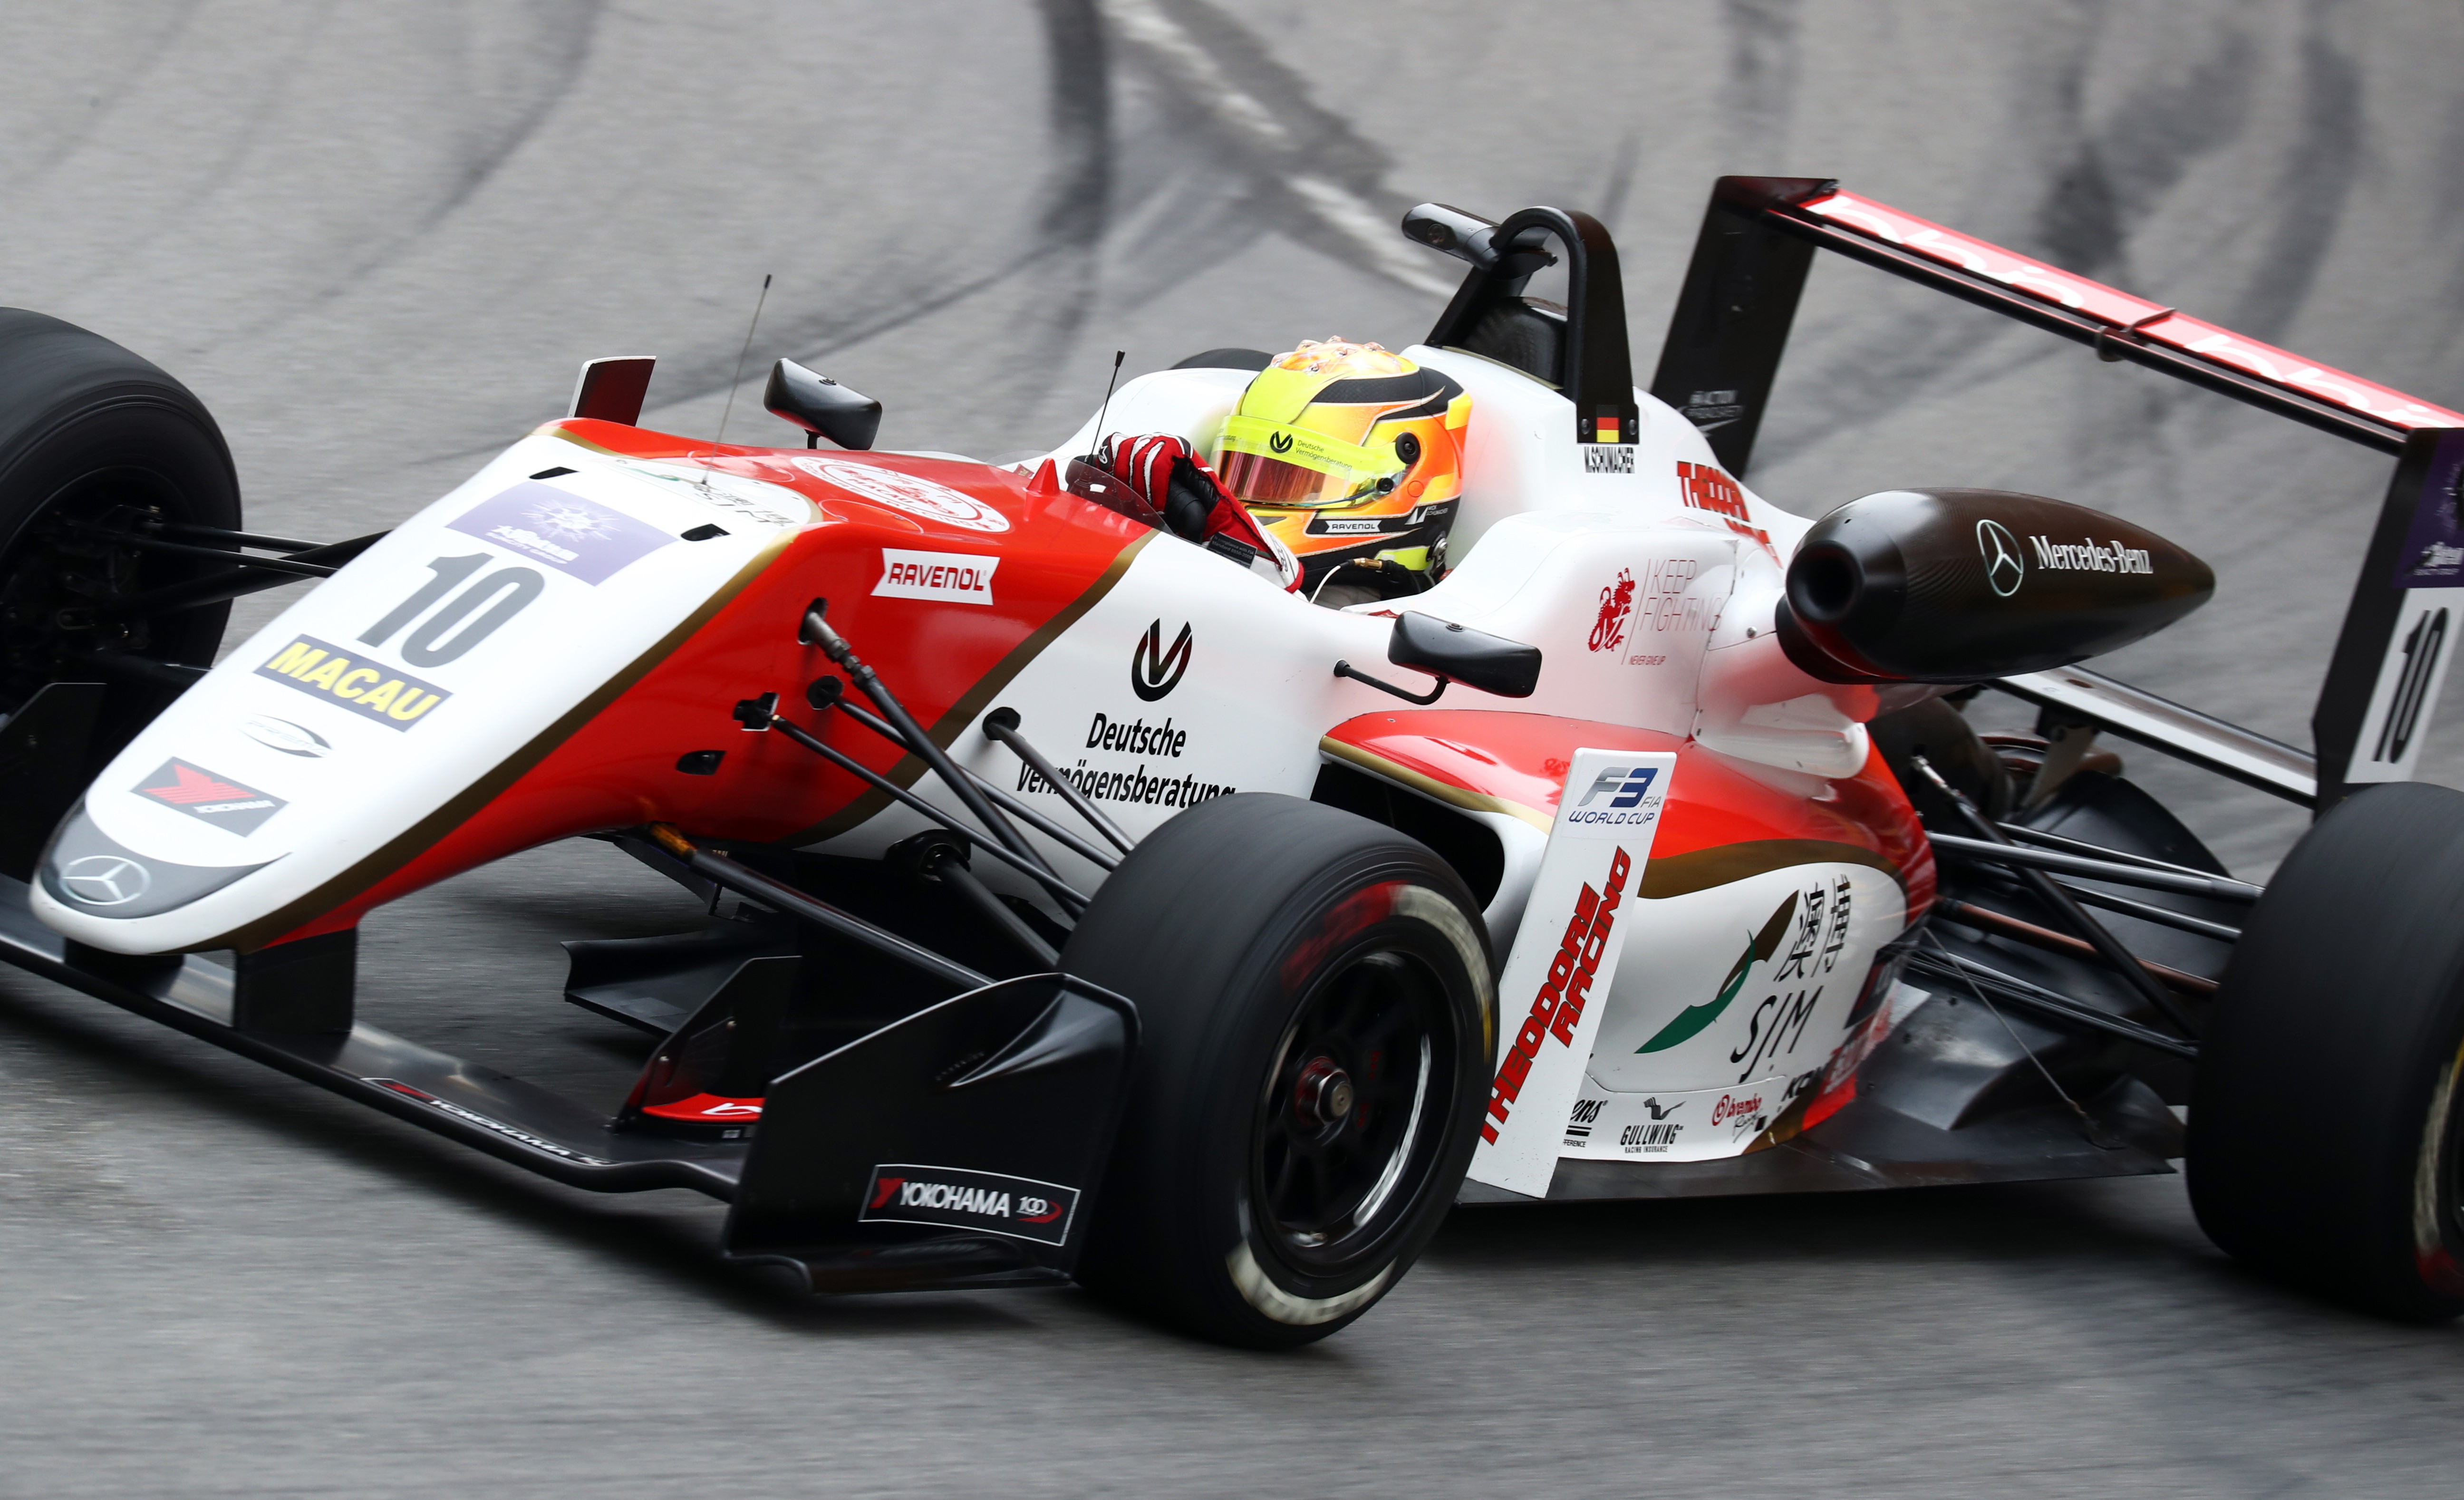 Mick Schumacher, the son of former German racing driver Michael Schumacher, will be back racing at this weekend’s Formula Three Macau Grand Prix, after competing in last year’s event. Photo: Nora Tam